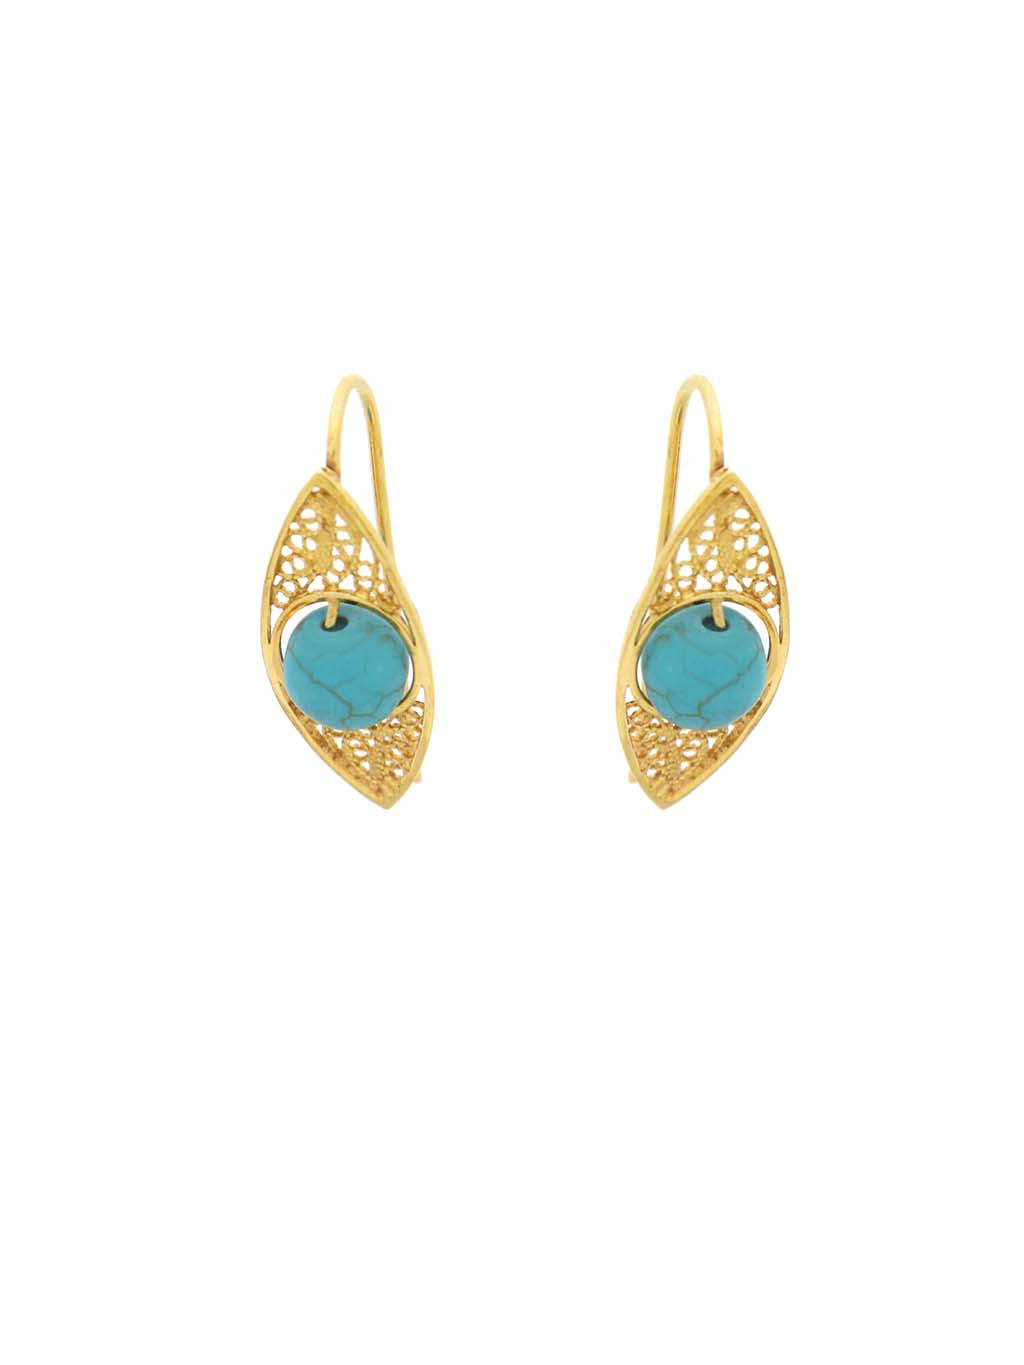 Stunning Earrings with Turquoise stone